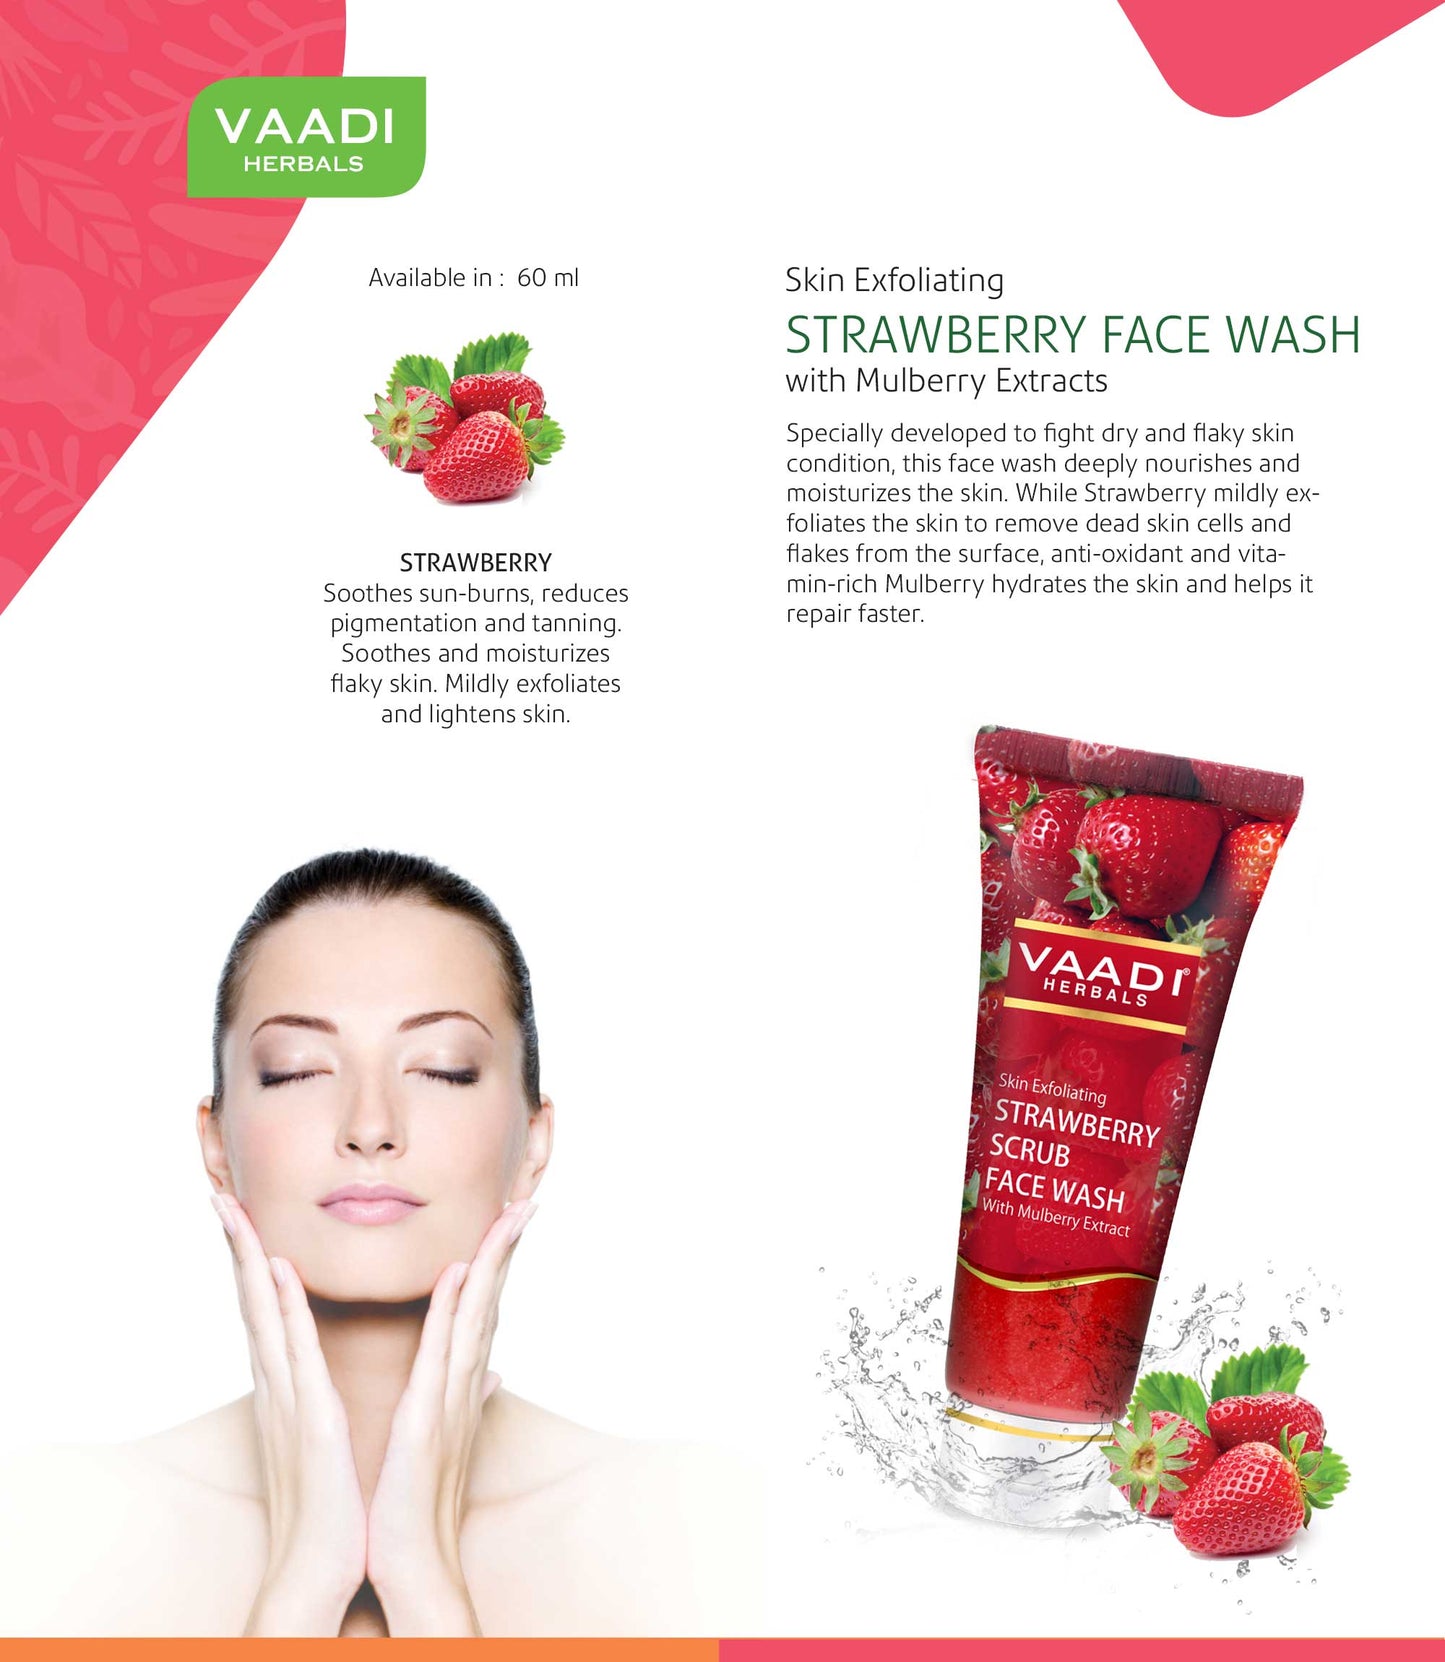 Skin Exfoliating Organic Strawberry Scrub Face Wash with Mulberry Extract- Removes Dead Skin - Deeply Nourishes Skin (60ml/ 2.1 fl oz)